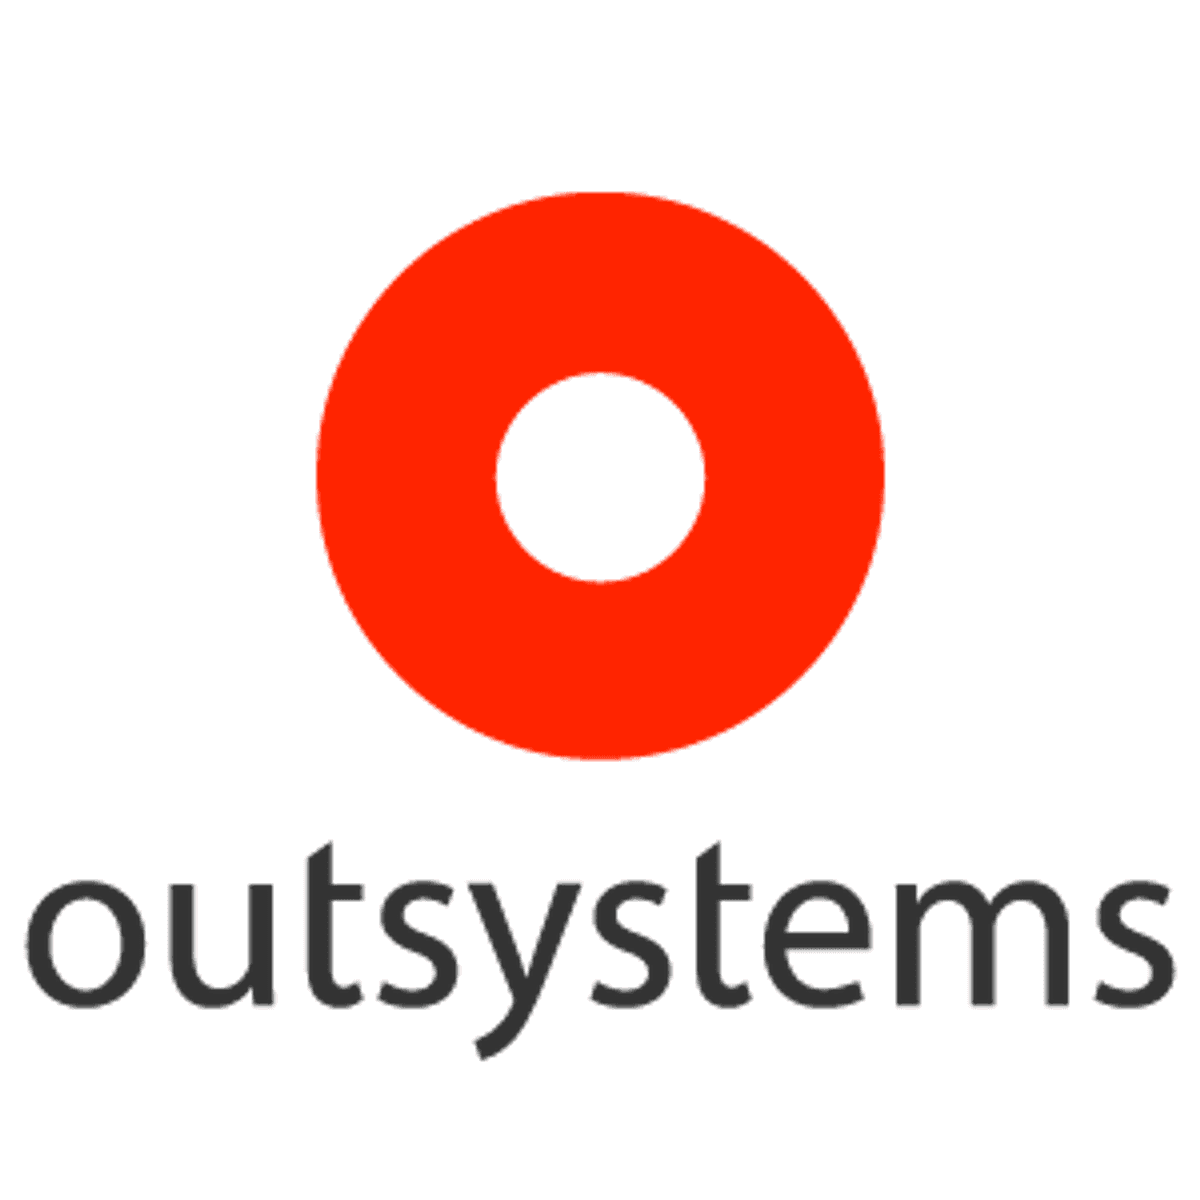 Outsystems NextStep evenement 2018 image